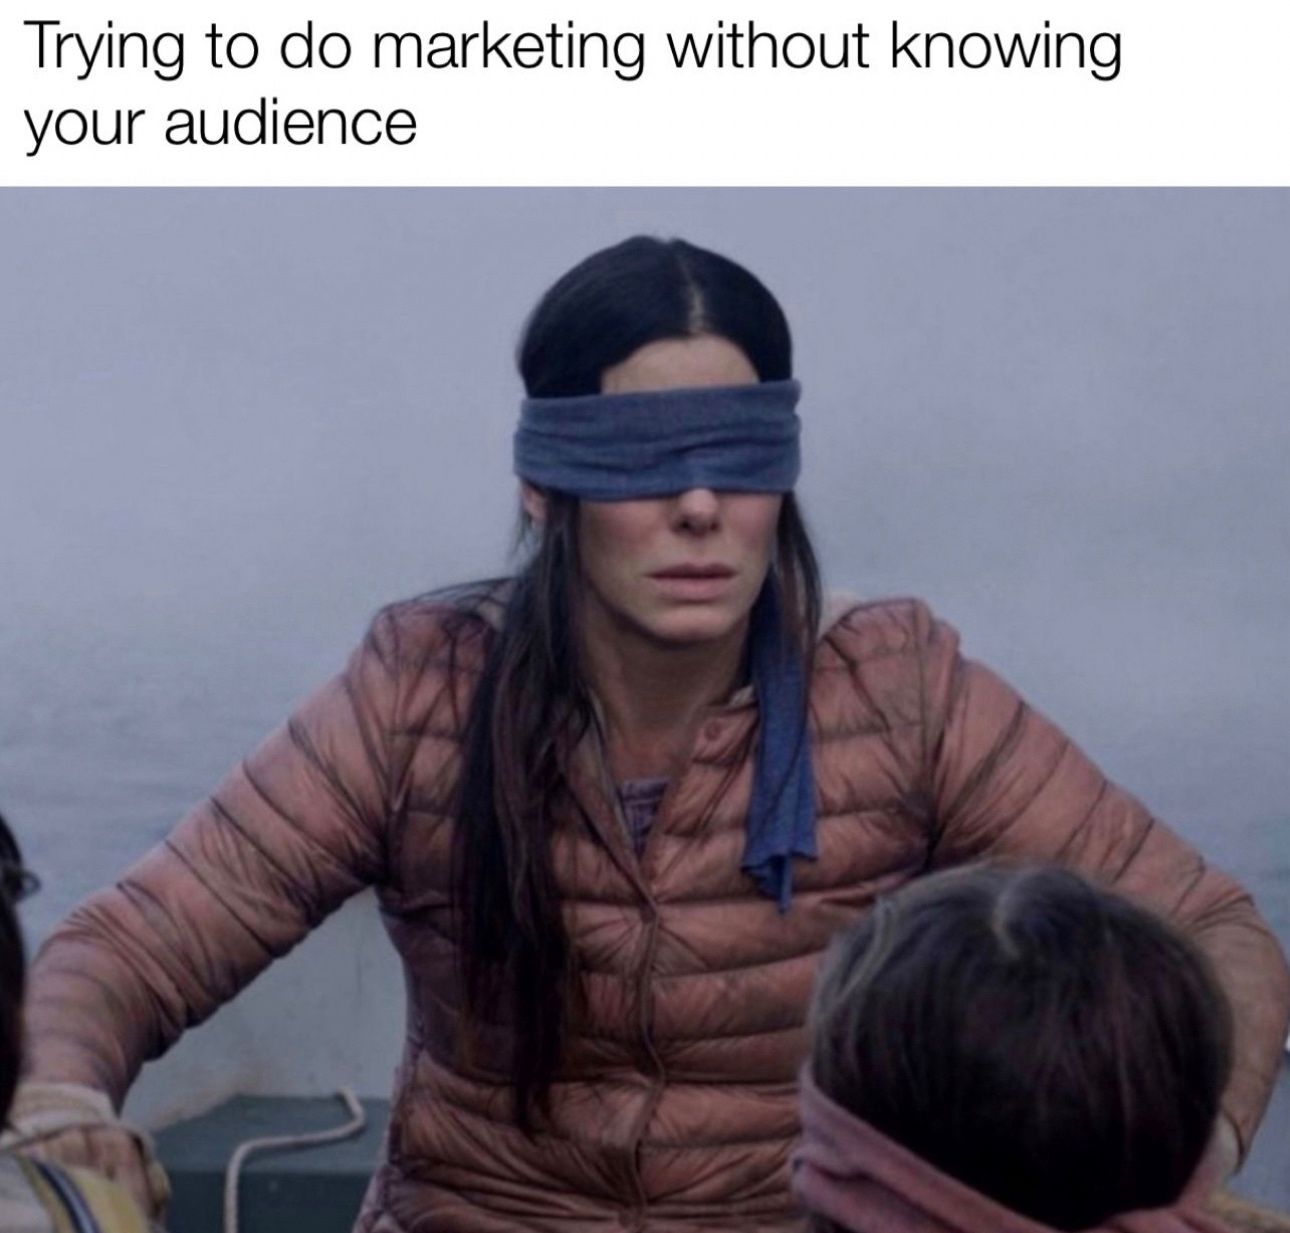 "Try to do marketing without knowing your audience" Birdbox meme